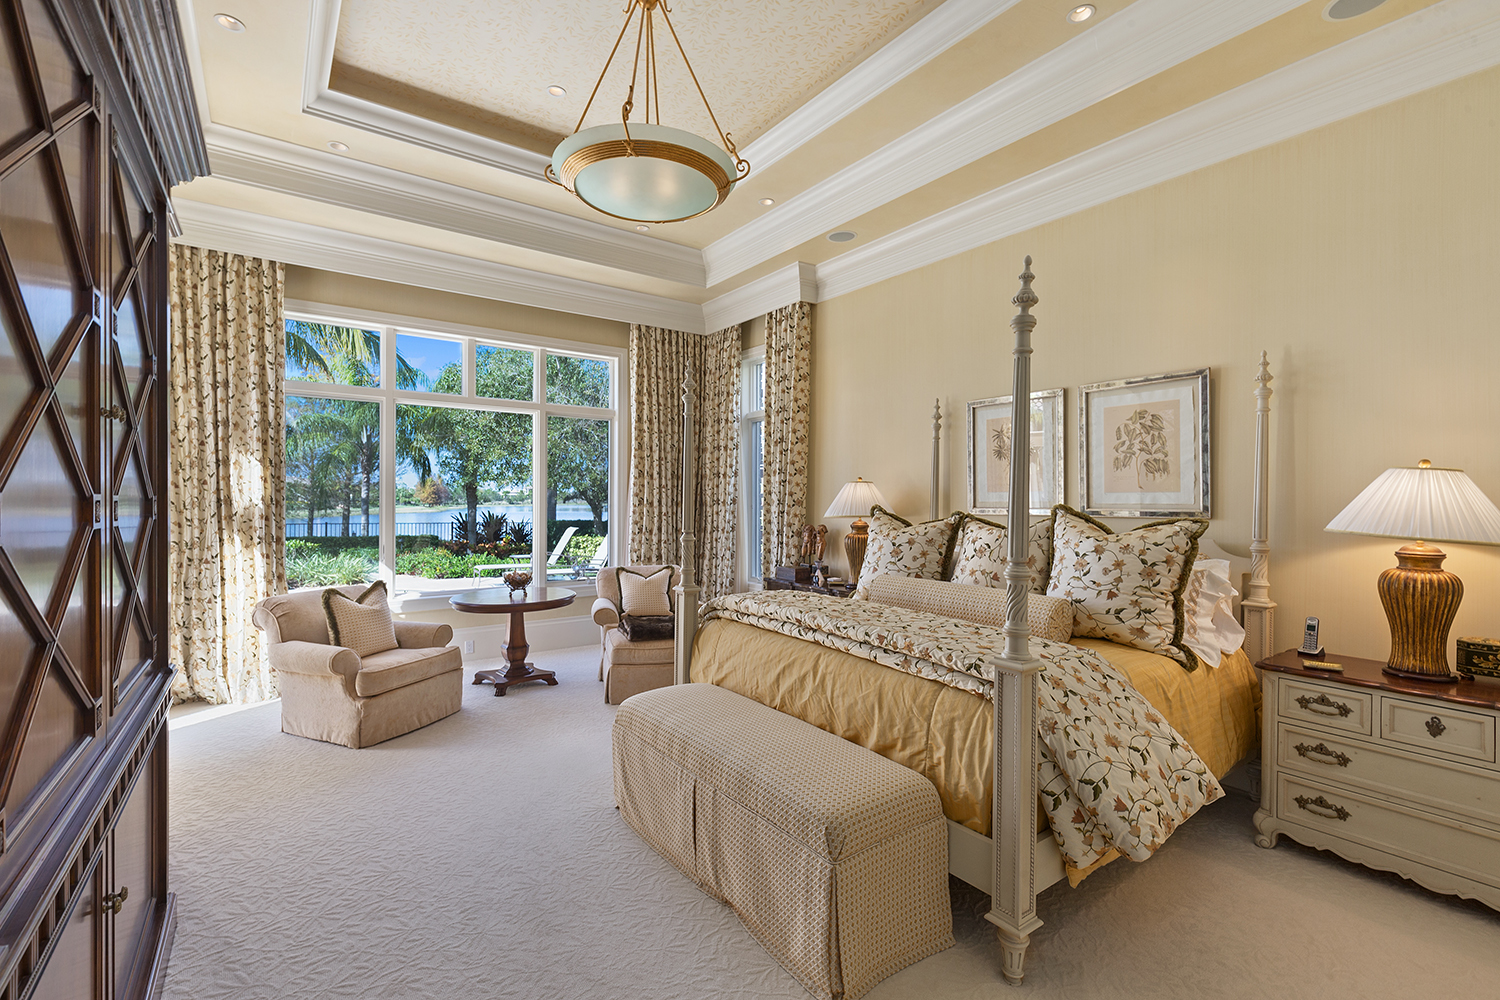 The sunny master bedroom faces the lake.